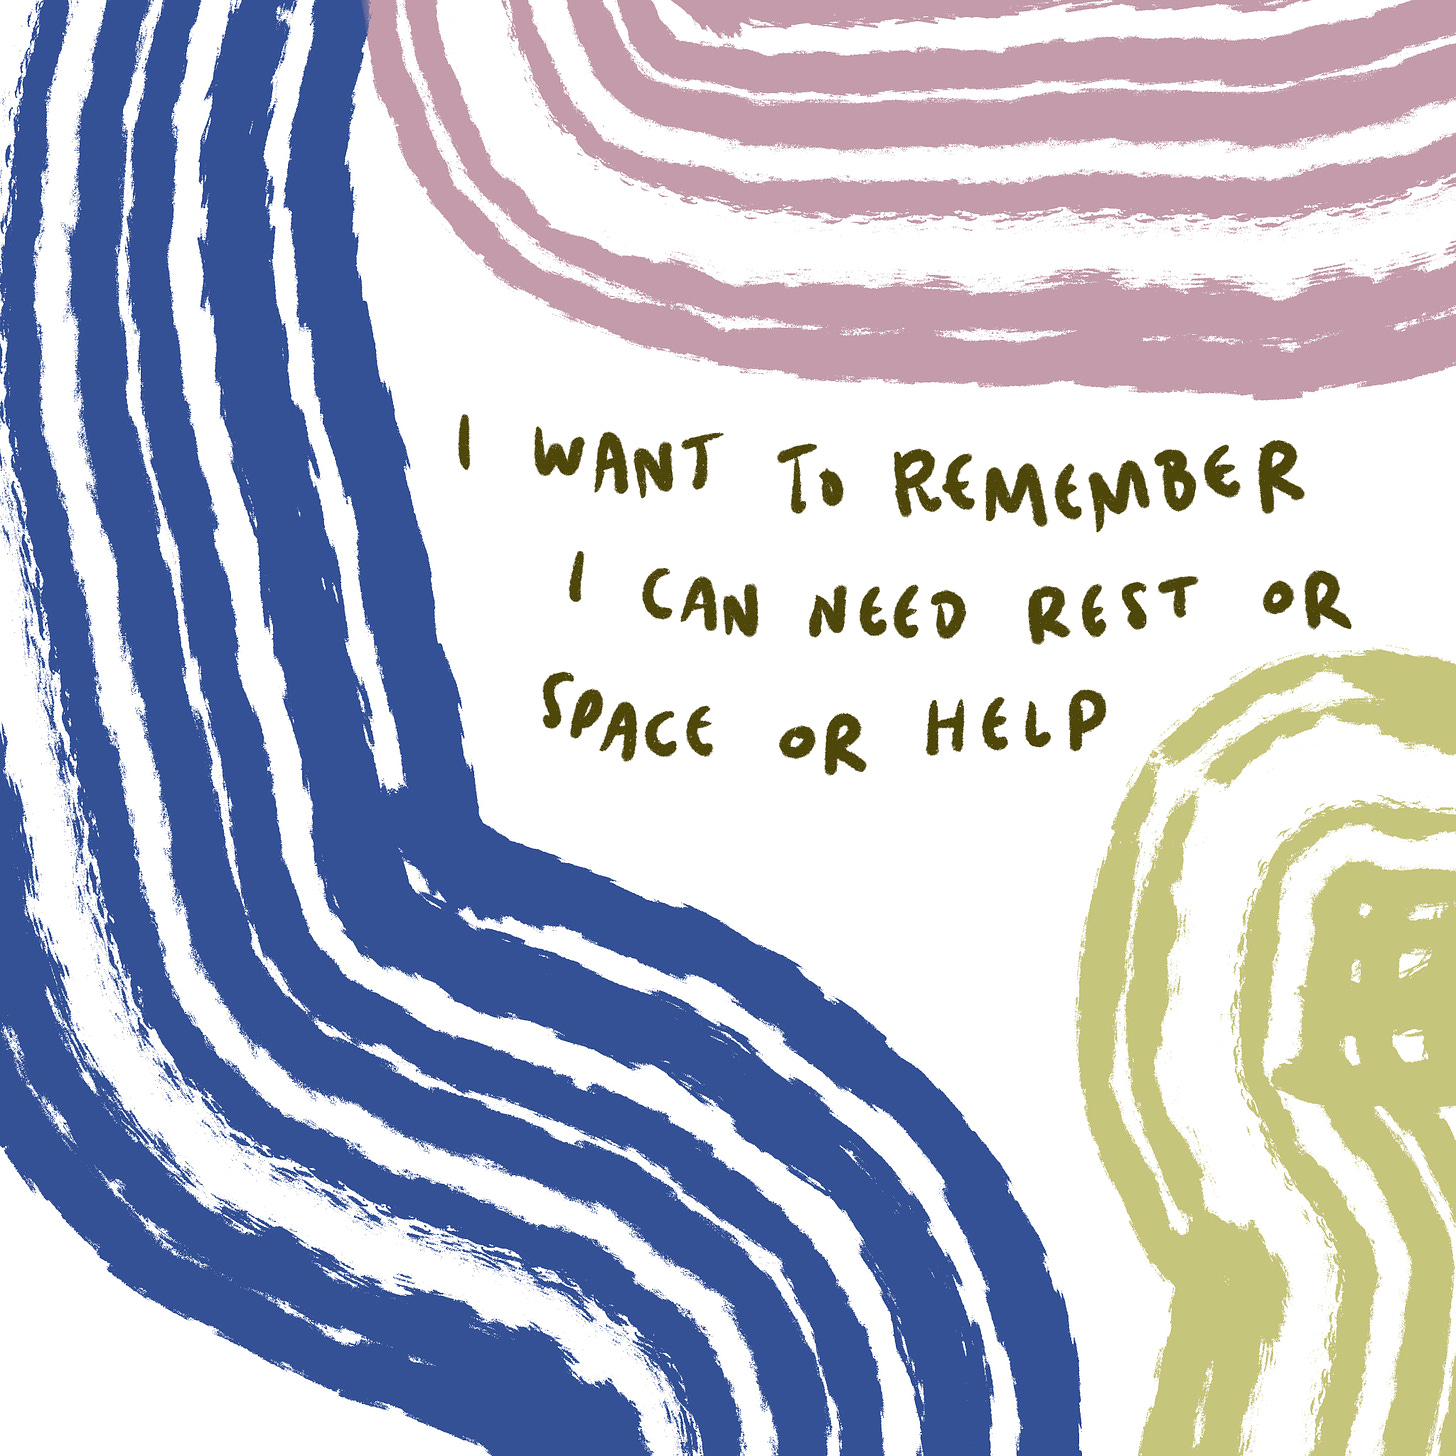 I want to remember I can need rest or space or help